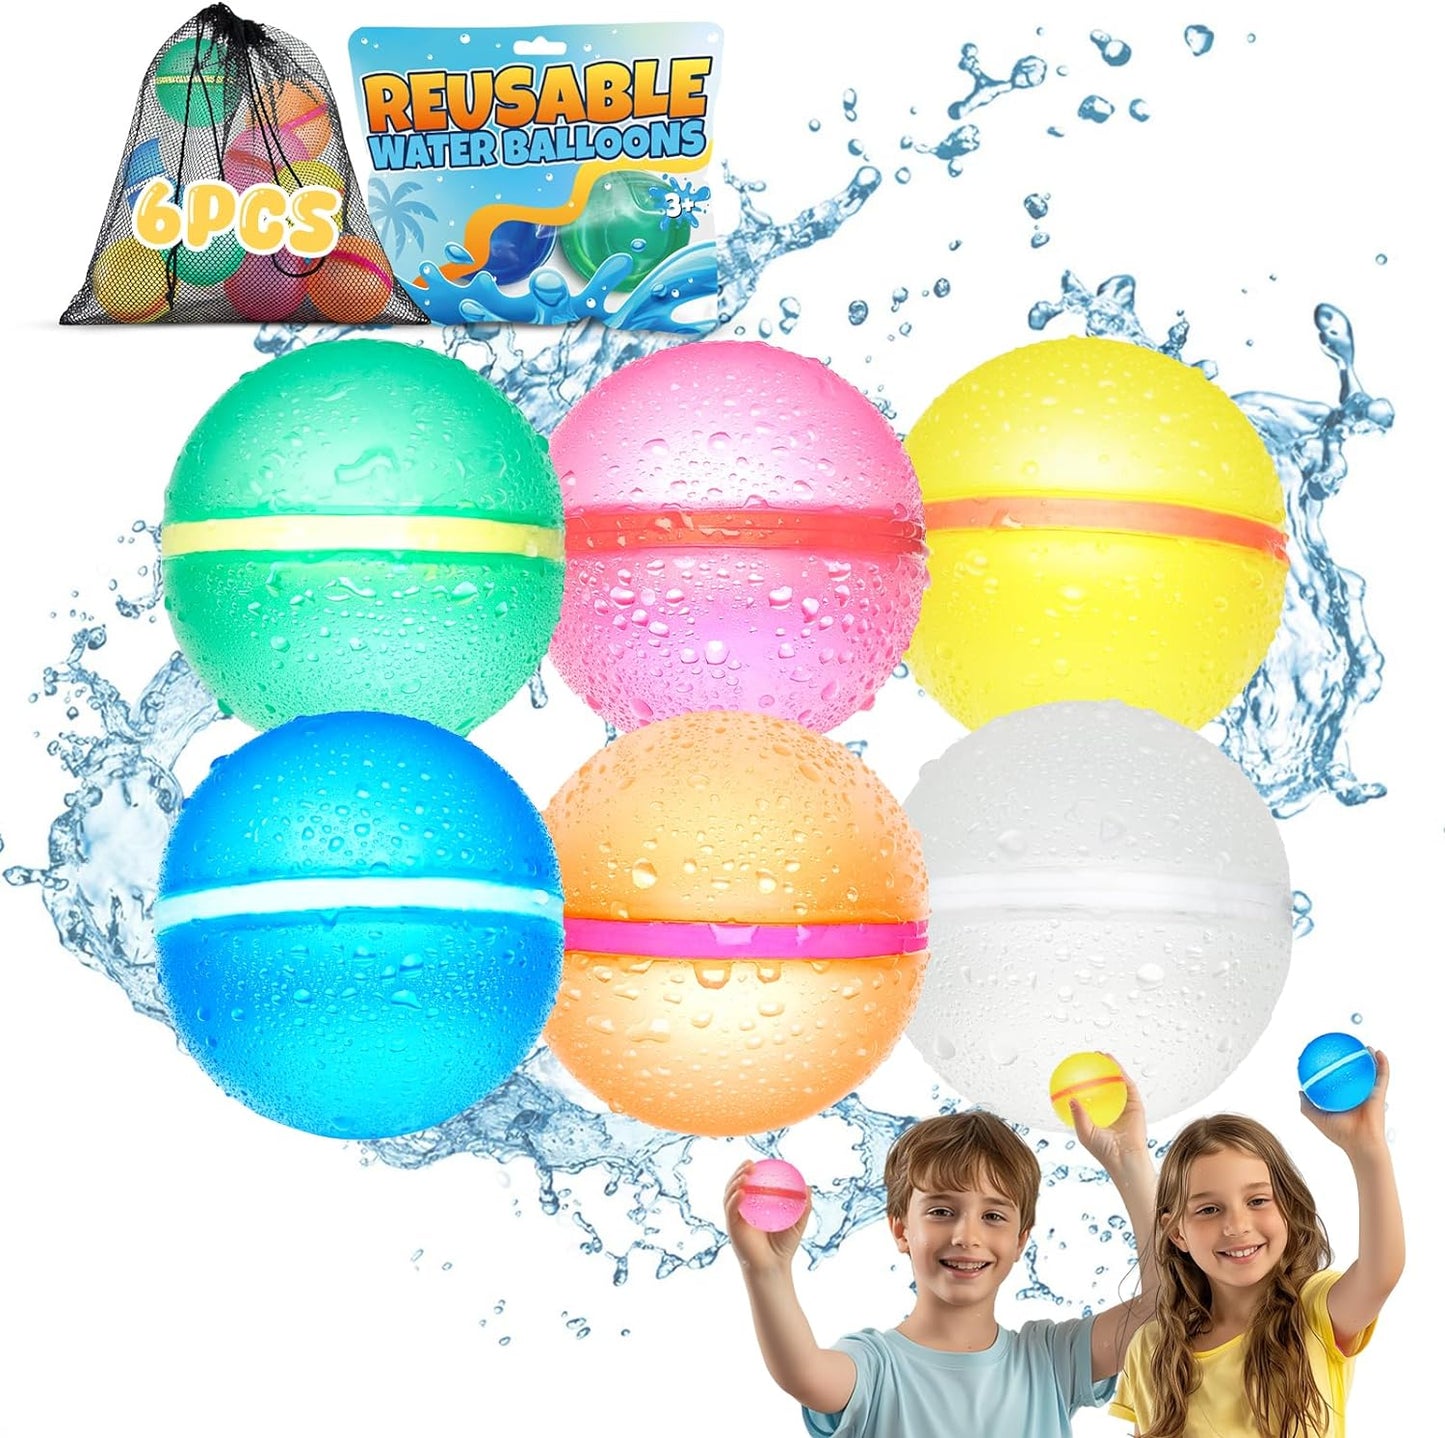 Reusable Water Balloons for Kids - Summer Toys, Pool Beach Water Toys for Boys and Girls, Silicone Water Balloons Quick Fill Splash Balls Bomb Party Supplies Outdoor Idea with Mesh Bag (12 Pcs)